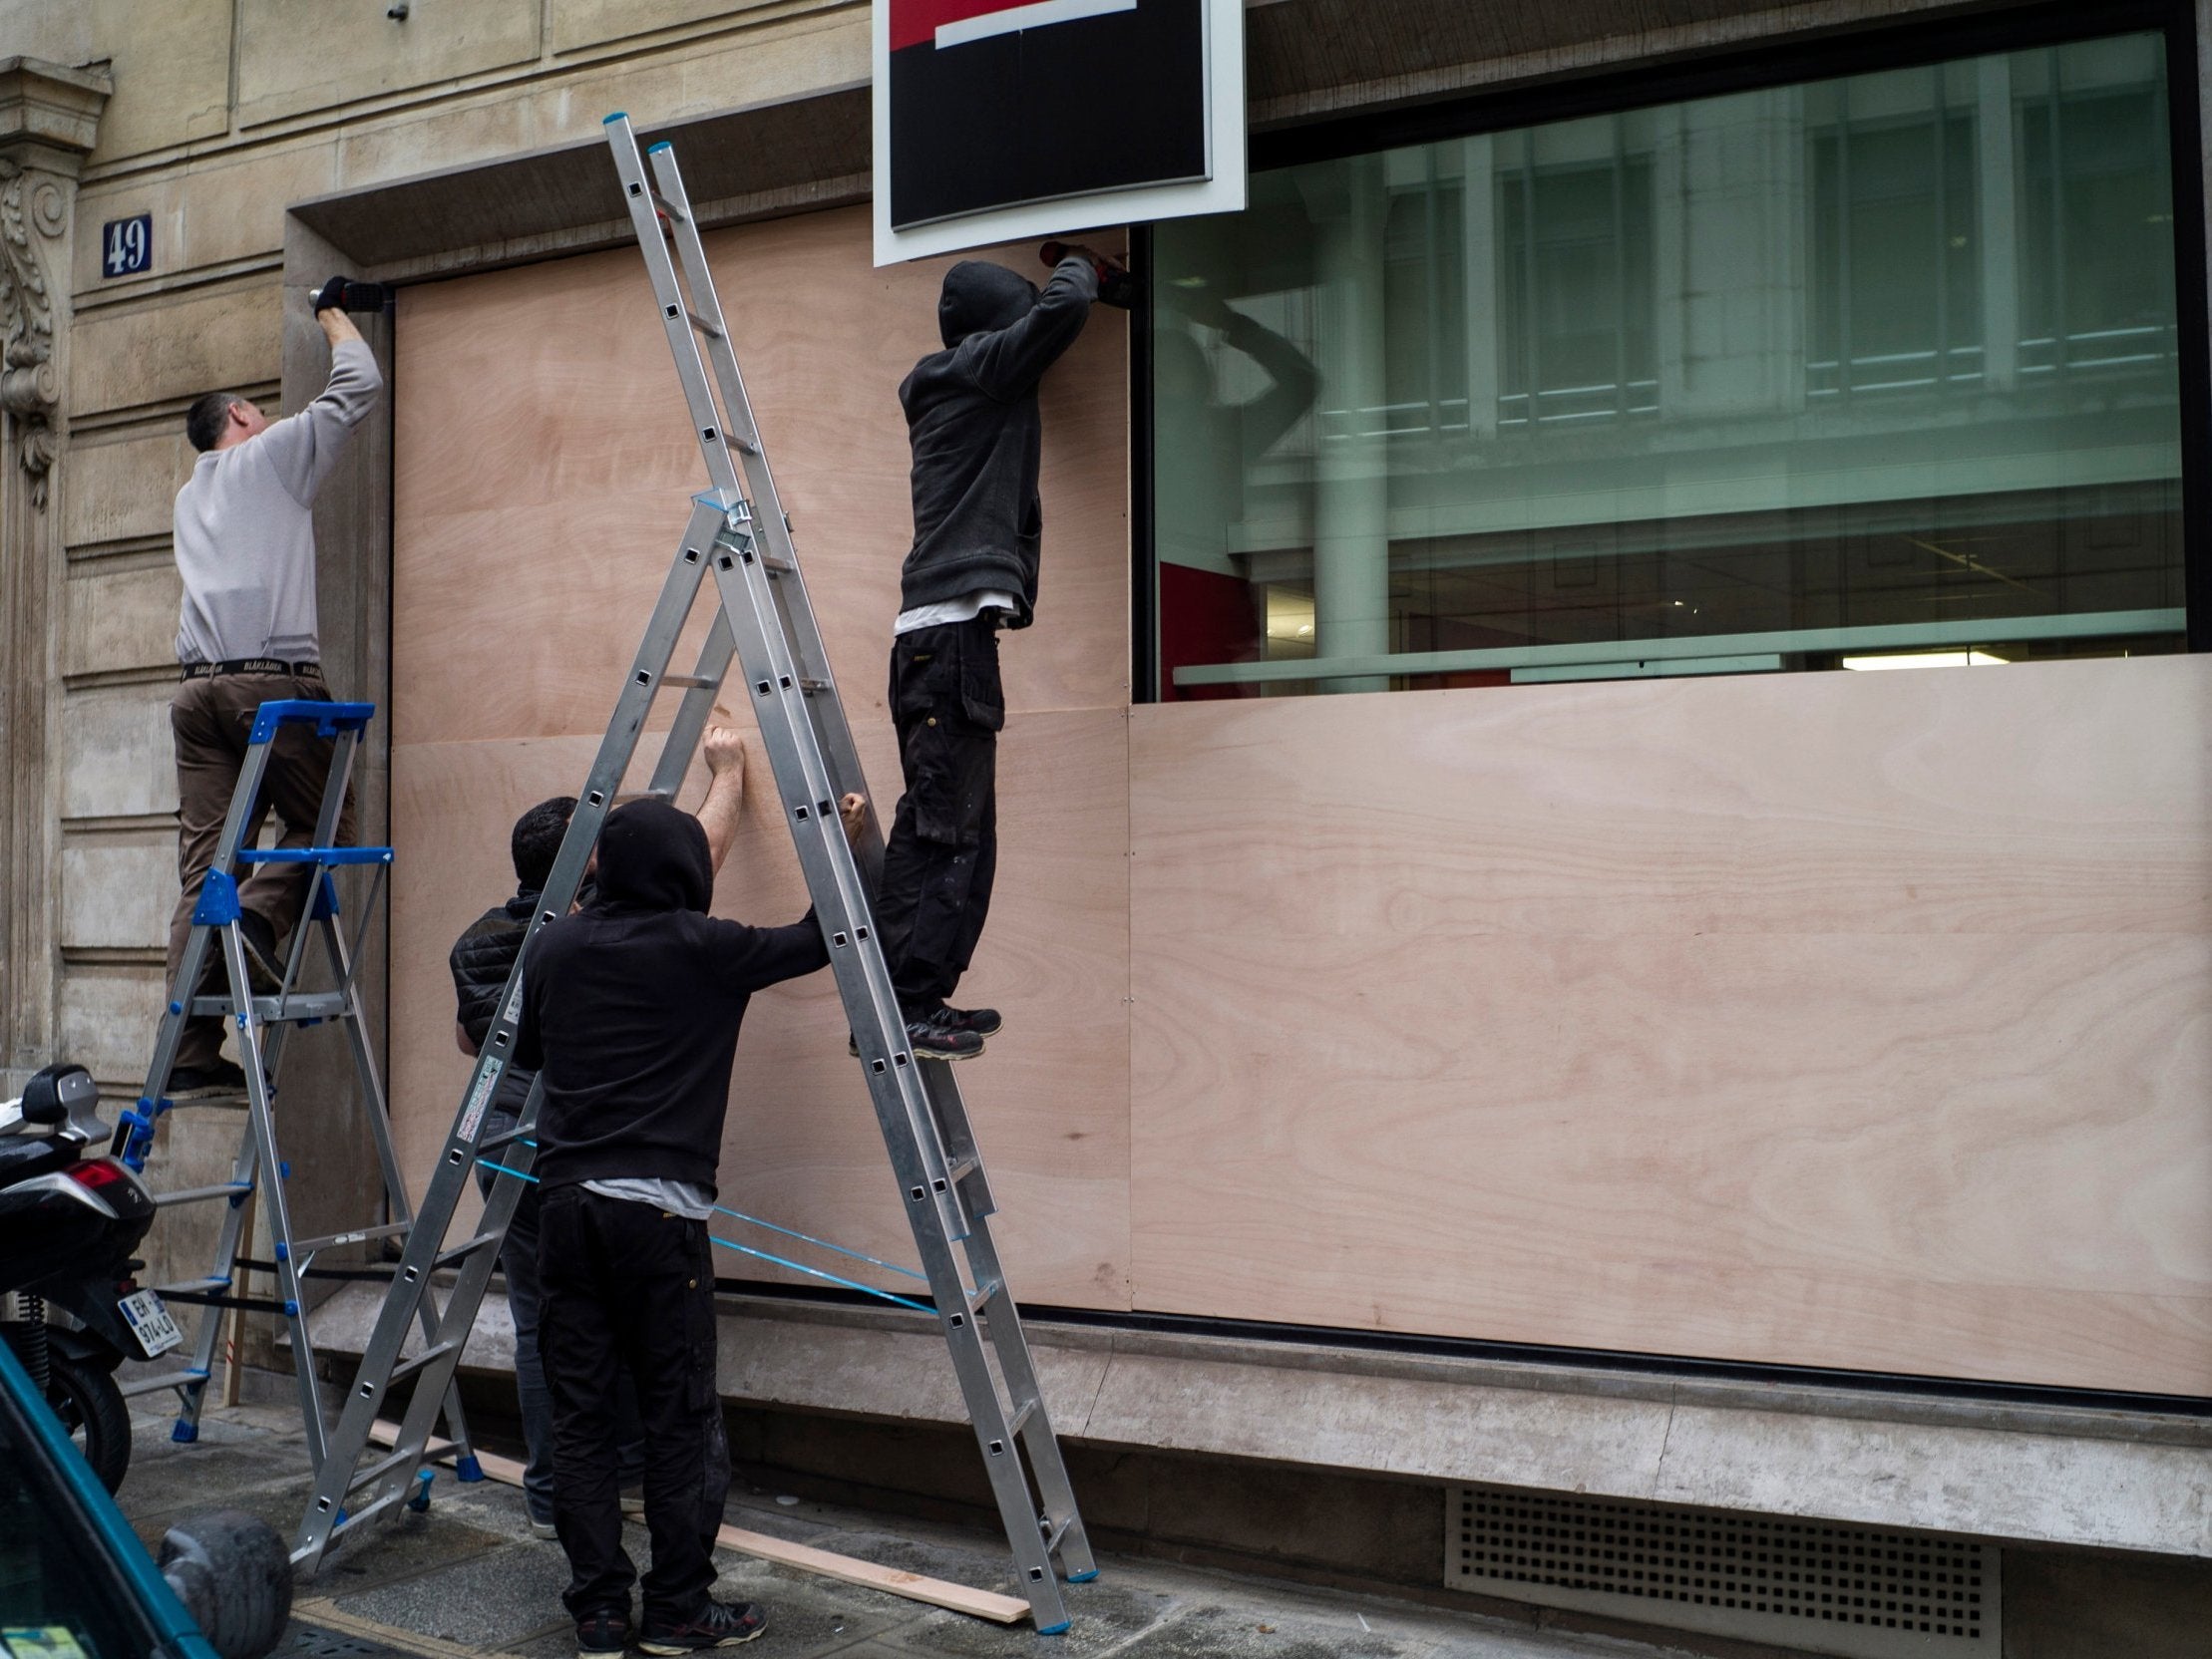 Men install wooden panels to protect a bank ahead of the national anti-governmental protest to be held on 8 December by the so-called Gilets Jaunes (Yellow Vest) movement in Paris